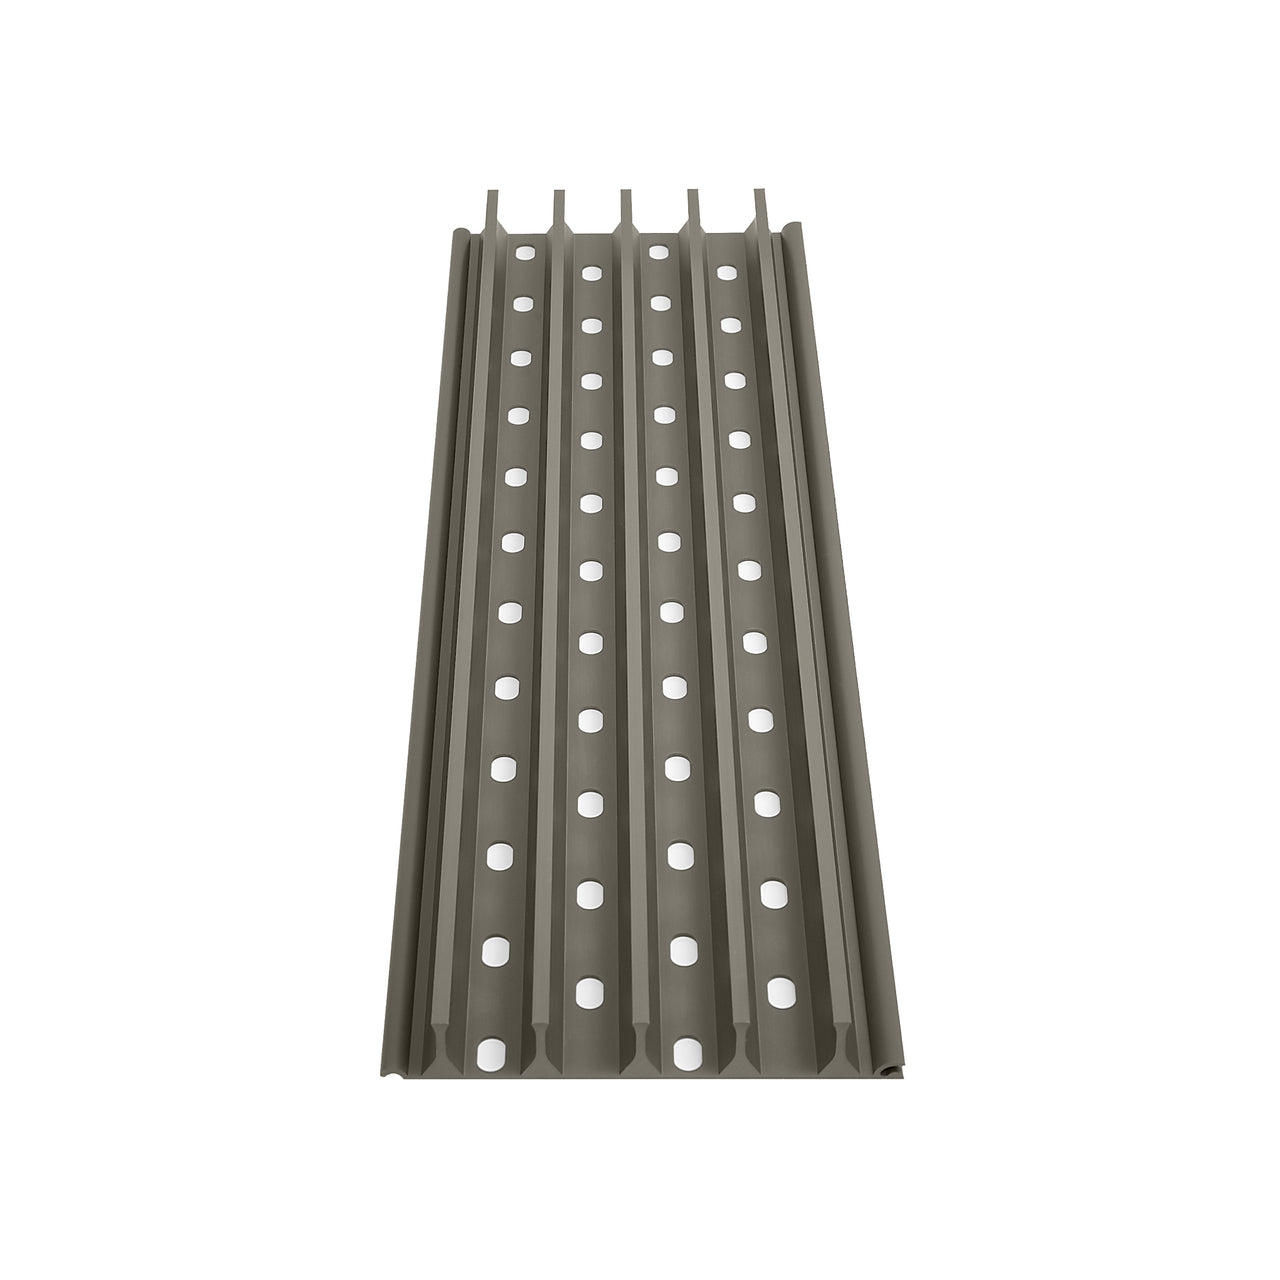 Grill Grate Single Panel 17.375" l Barbecues Galore